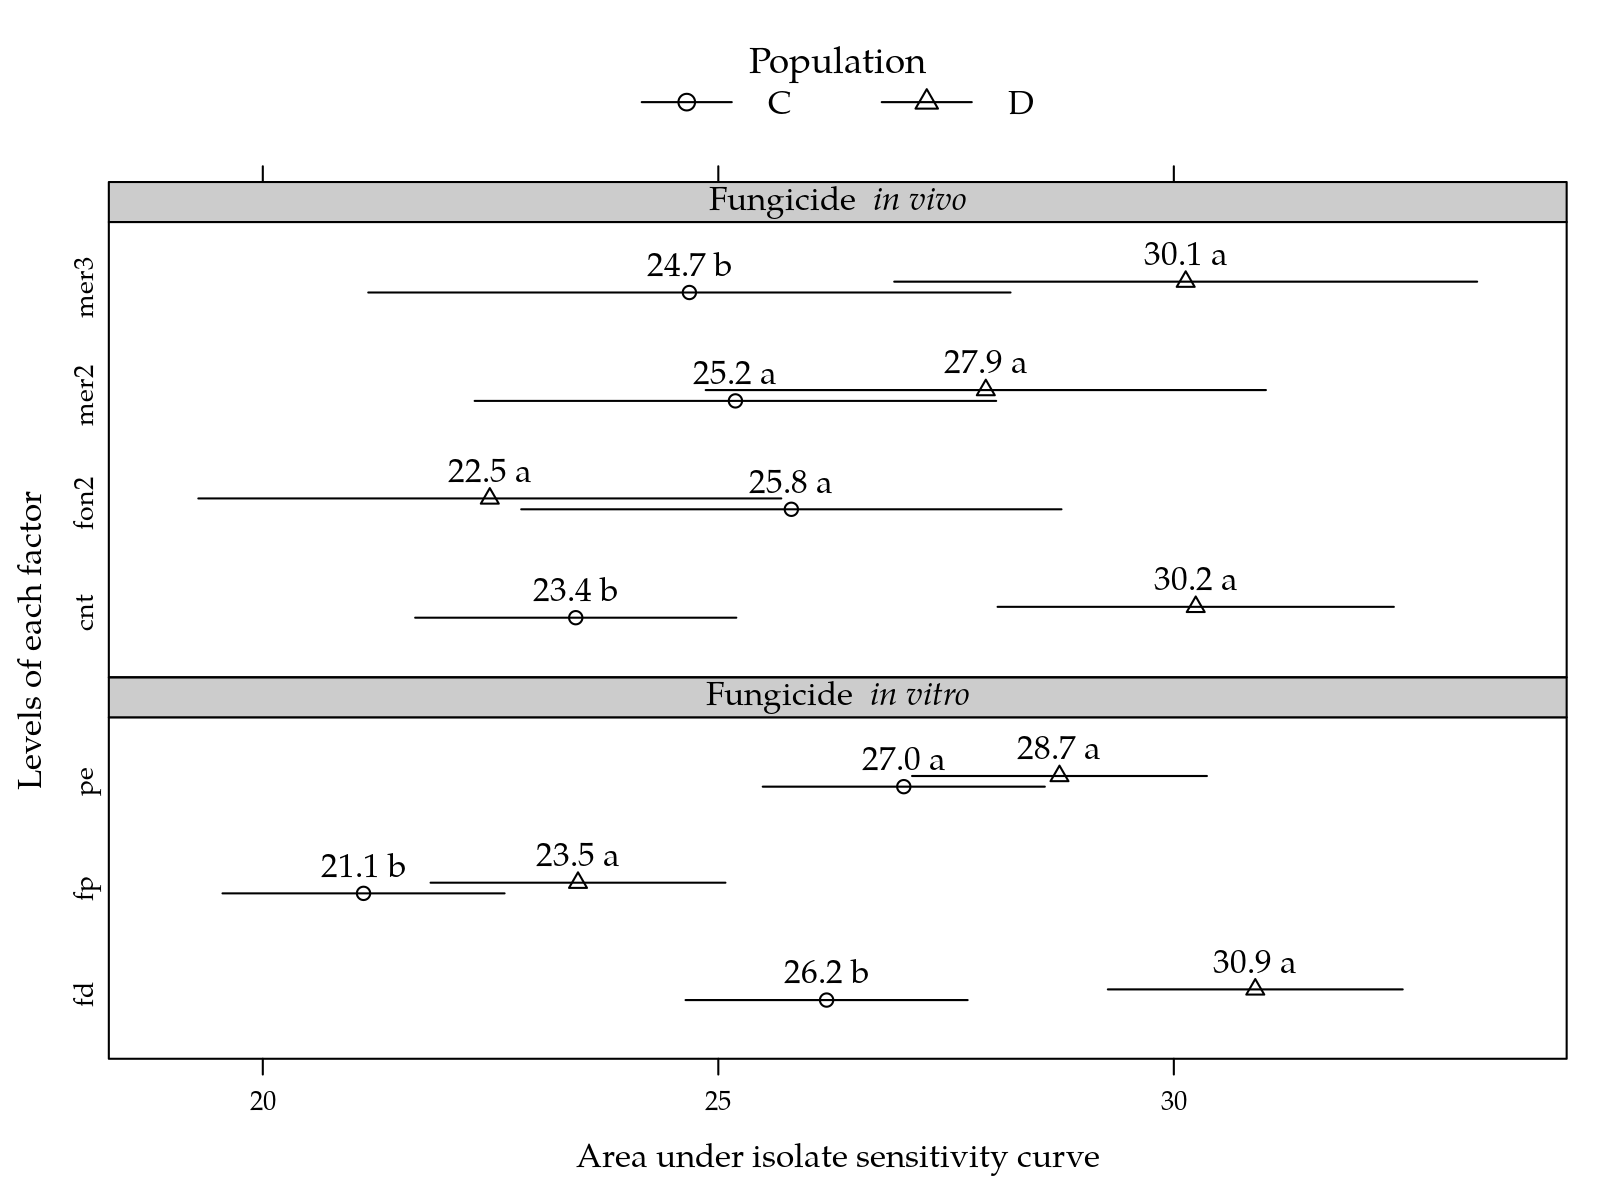 Figure  7: Area under isolate sensitivity curve for combination between population and *in vitro* fungicide (top) and population and *in vivo* fungicide (bottom). Pairs of means comparing populations in each row of the plot (each factor level at the y-axis) followed by the same letter are not statistically different at 5% significance level.